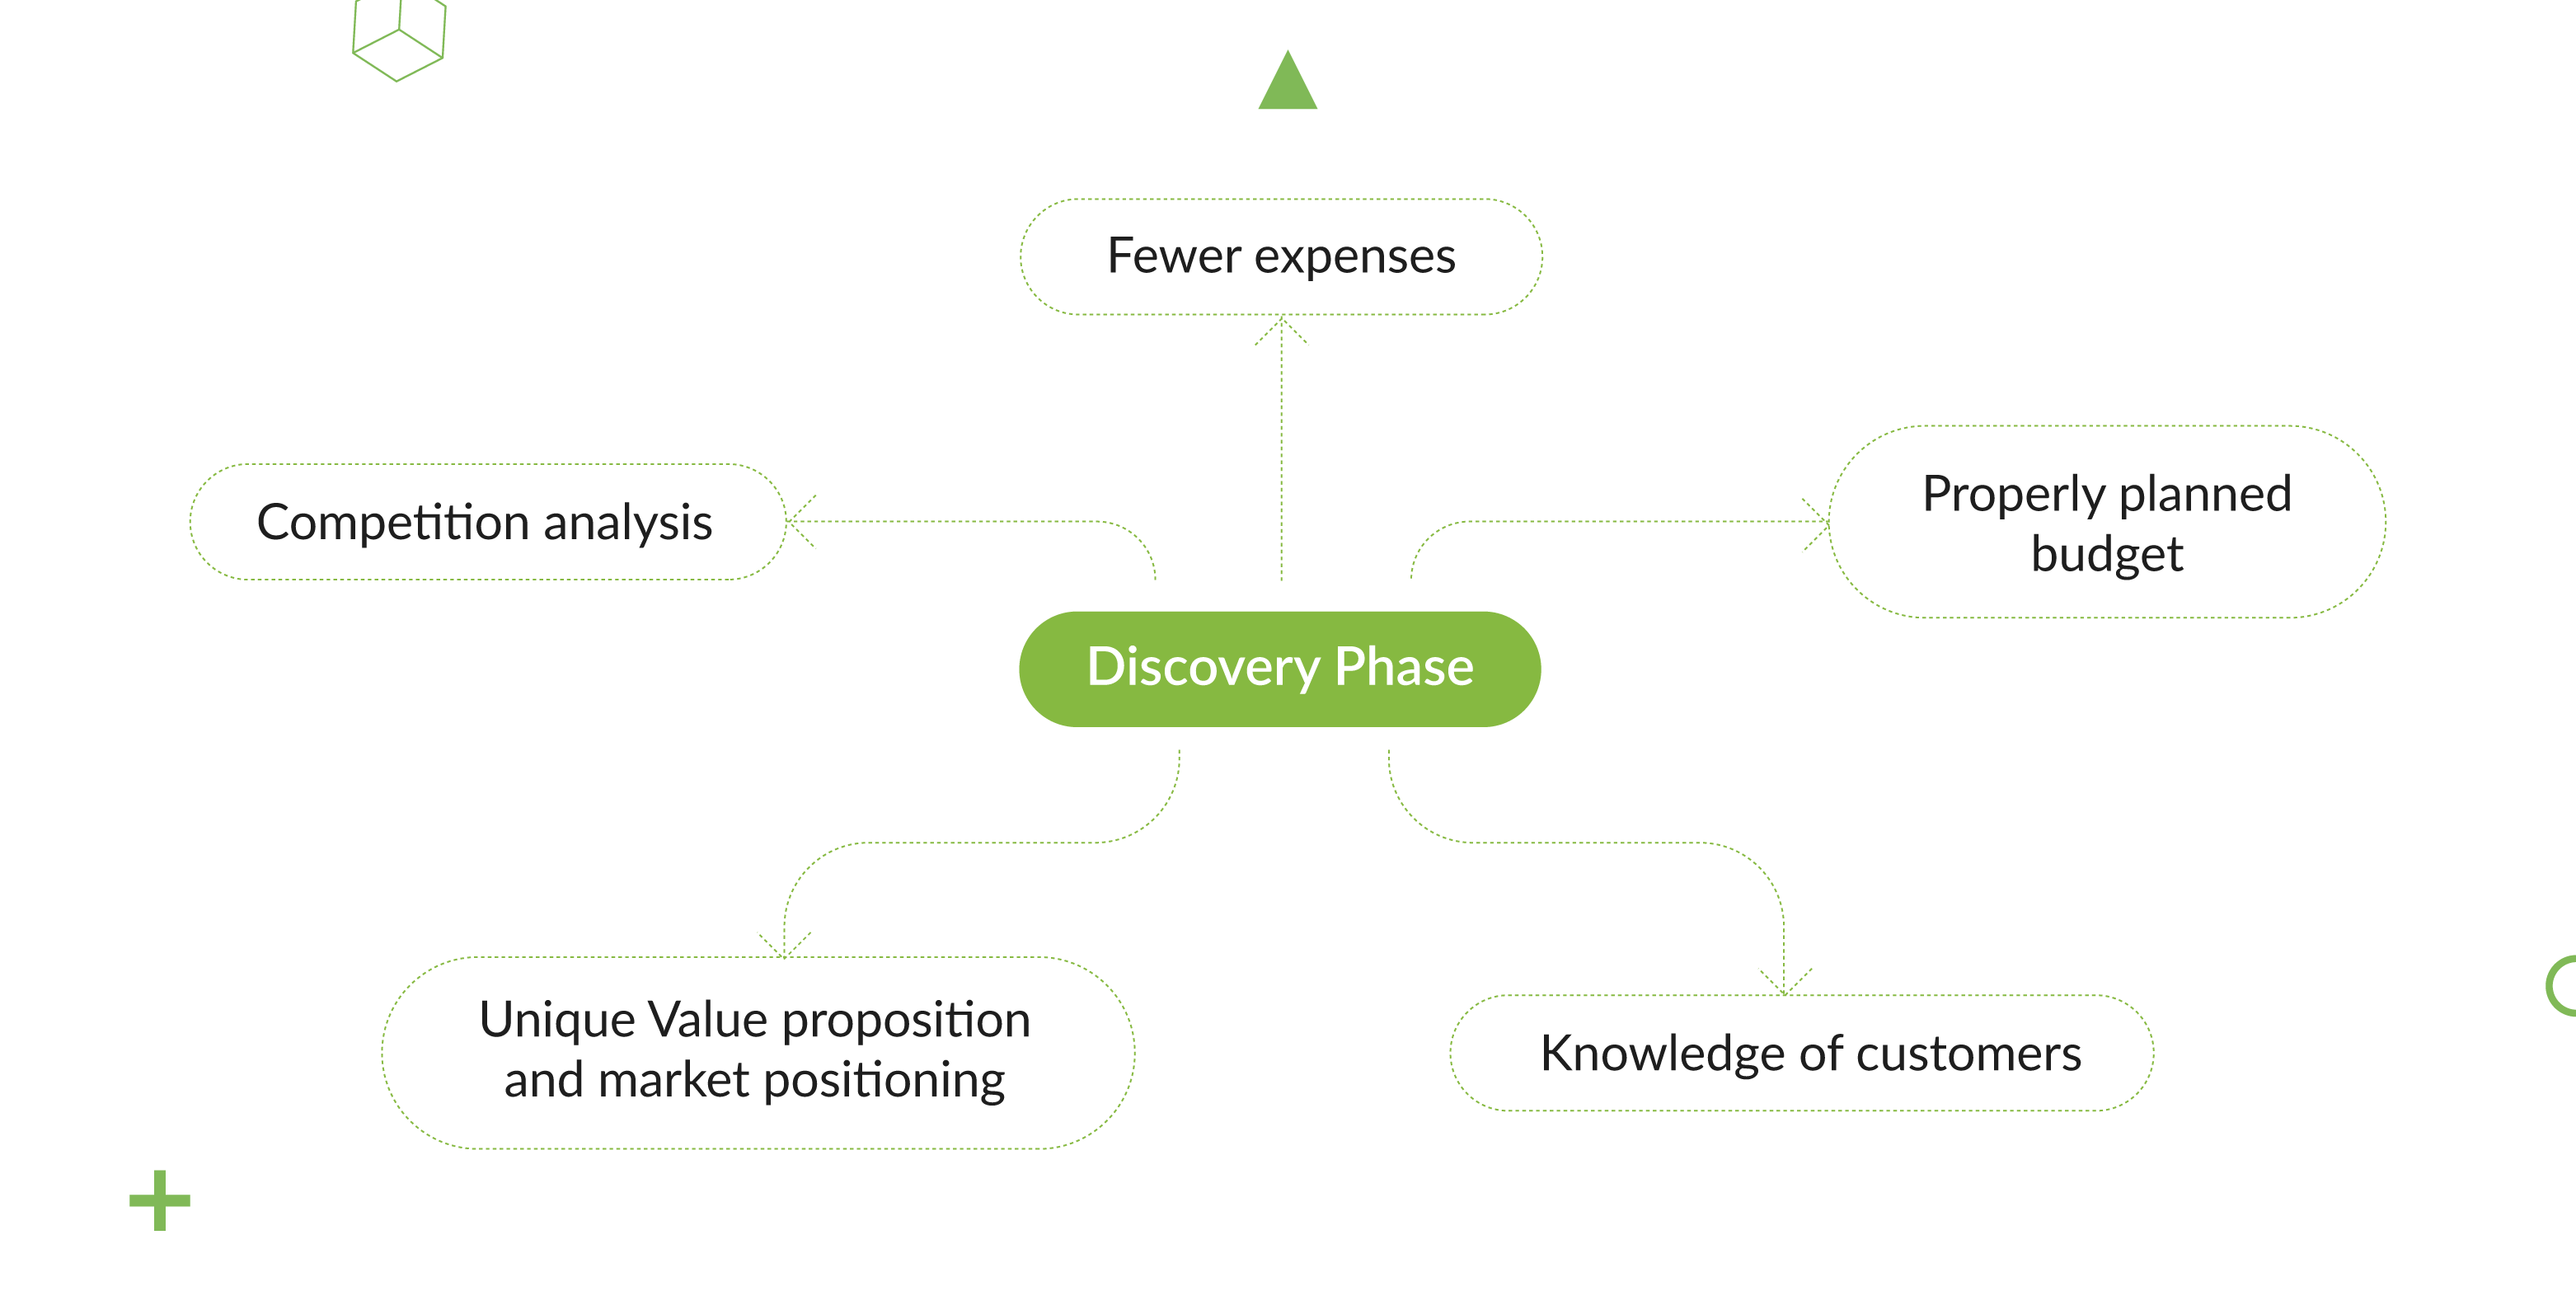 Discovery phase benefits